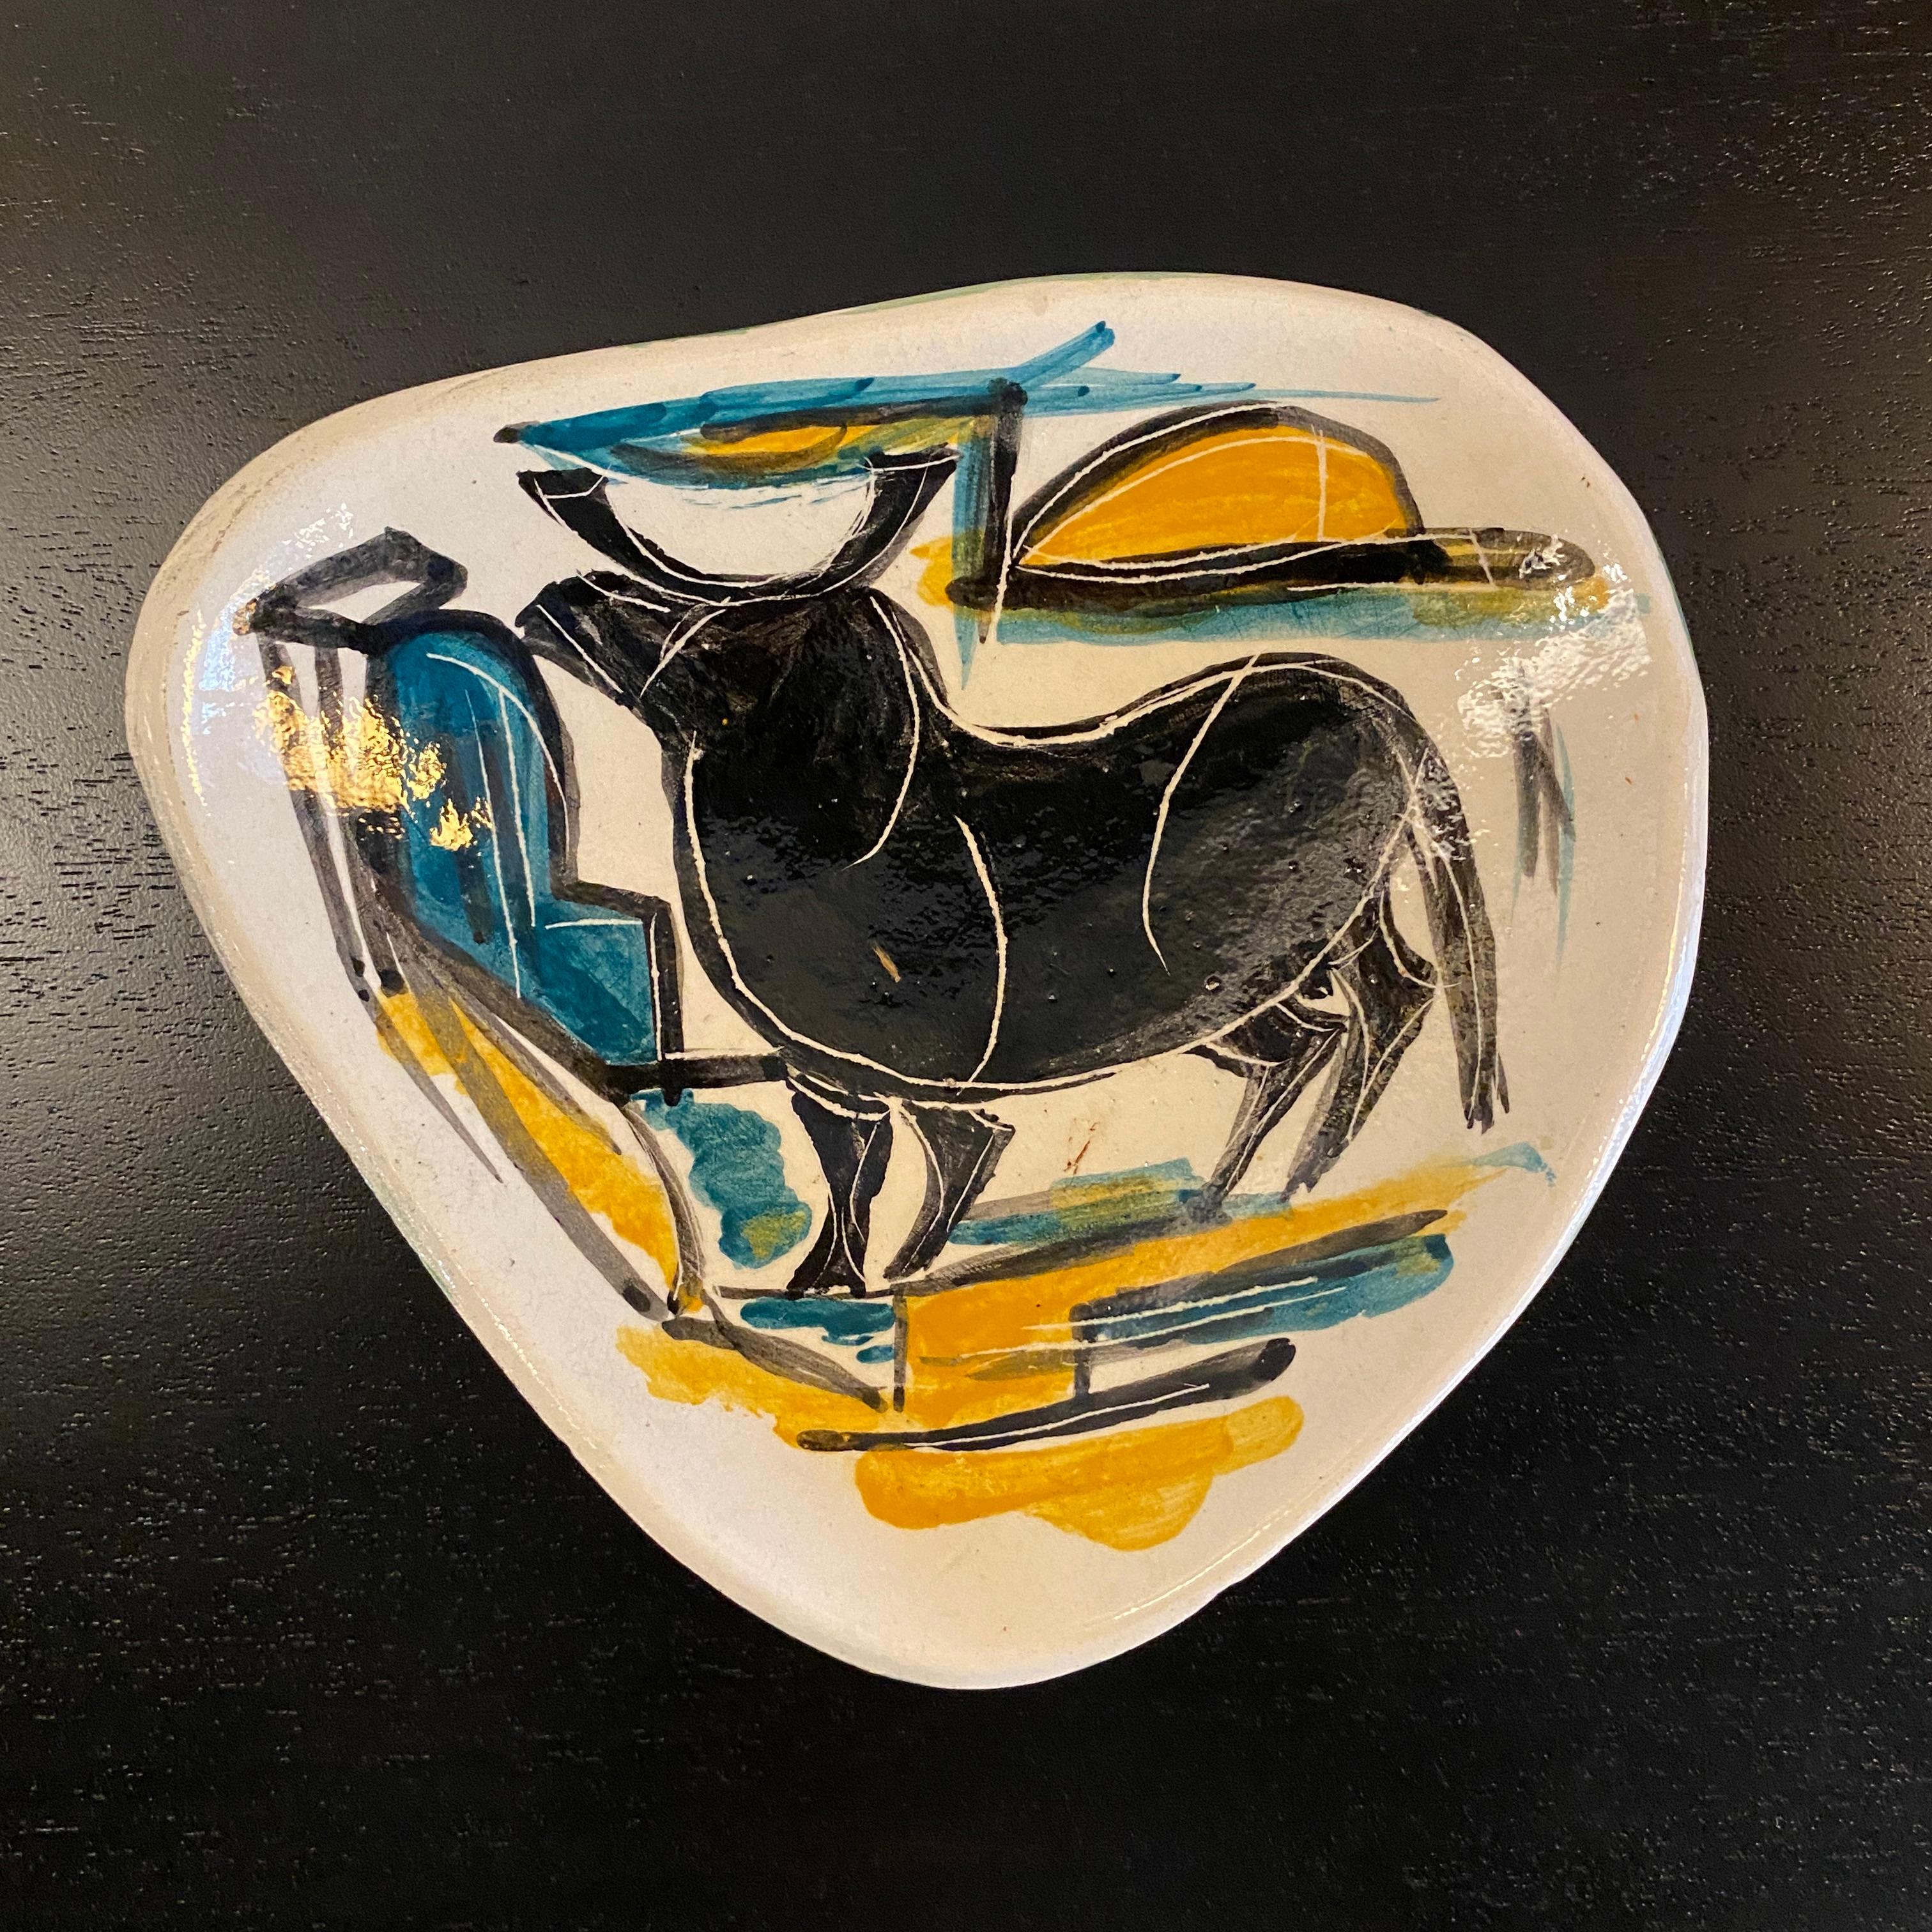 Mid century modern, hand-painted, art pottery dish features an abstract bull scene in bold black, teal and yellow brush strokes against a white background. The back of the piece is a dark teal green. The dish is an irregular triangular shape with a